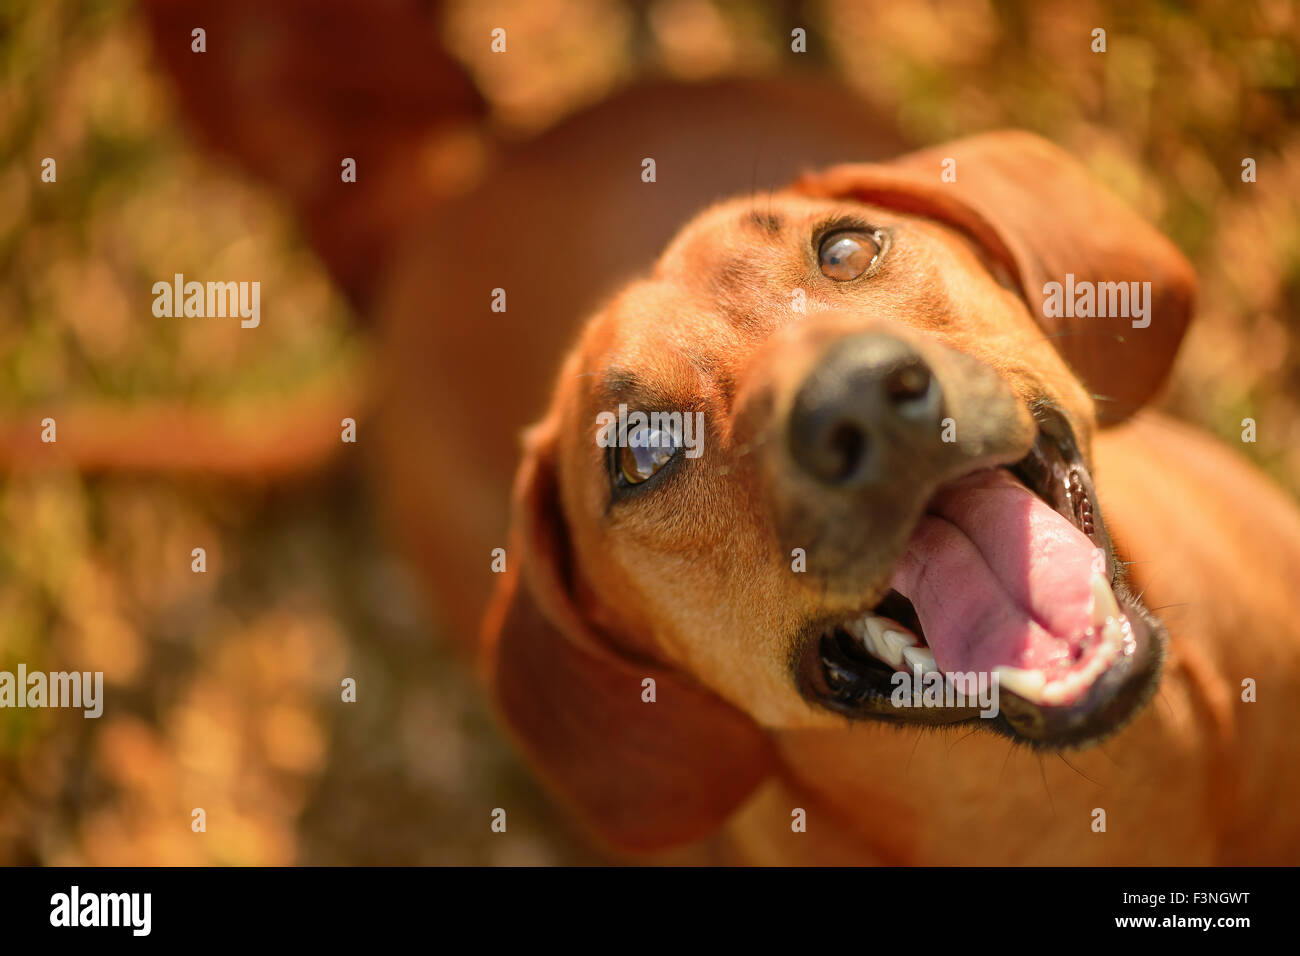 Happy dog looking up on a sunny day. Stock Photo